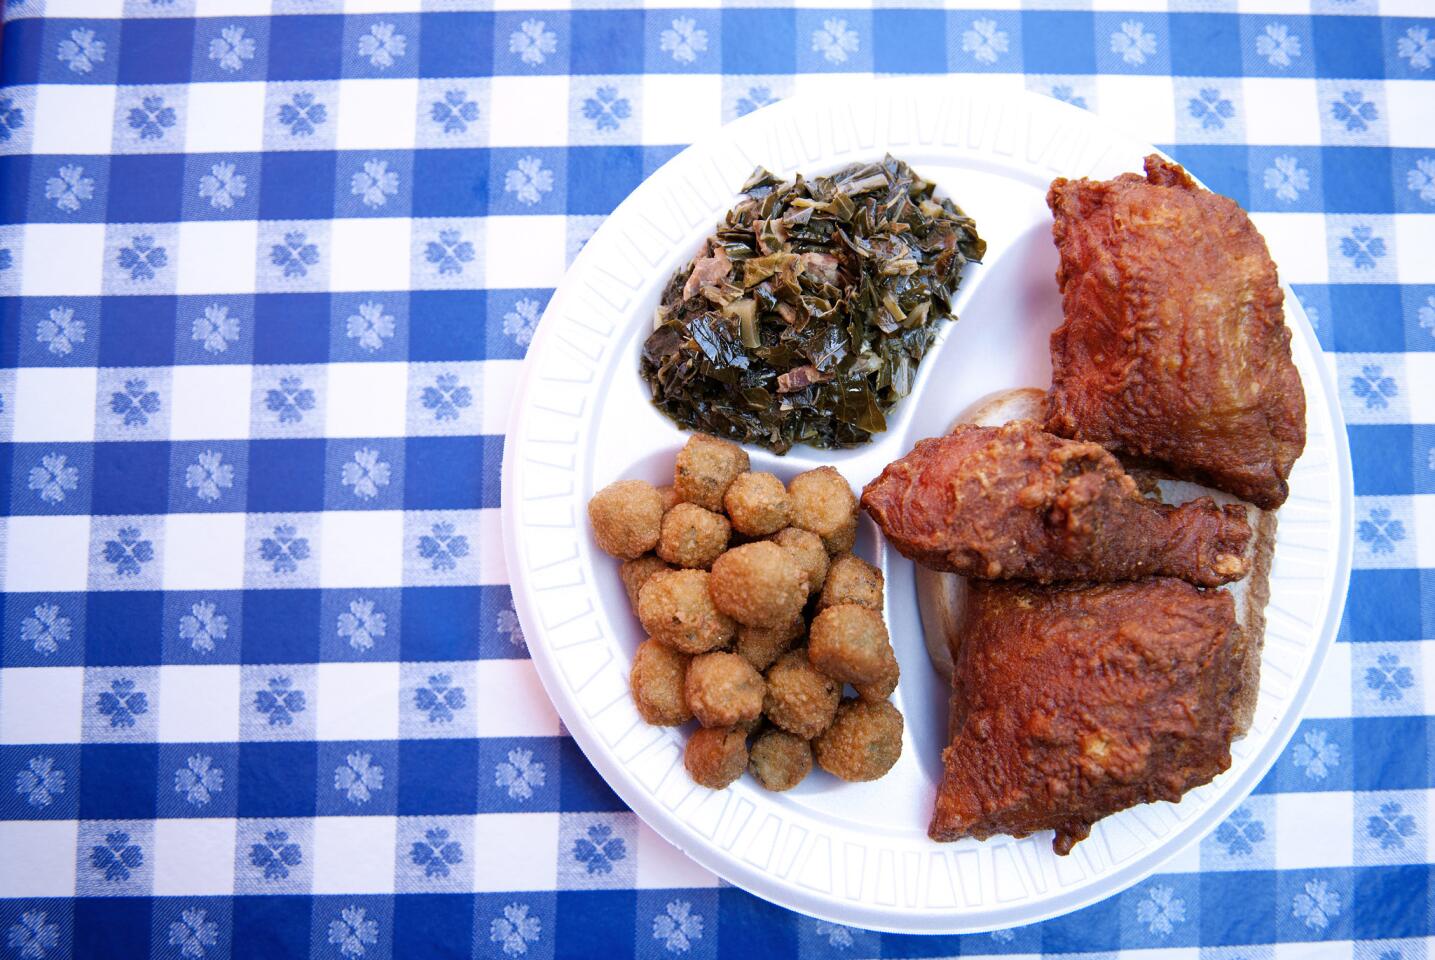 Fried okra, greens and fried chicken are served up at Gus's Fried Chicken in Arlington Heights.